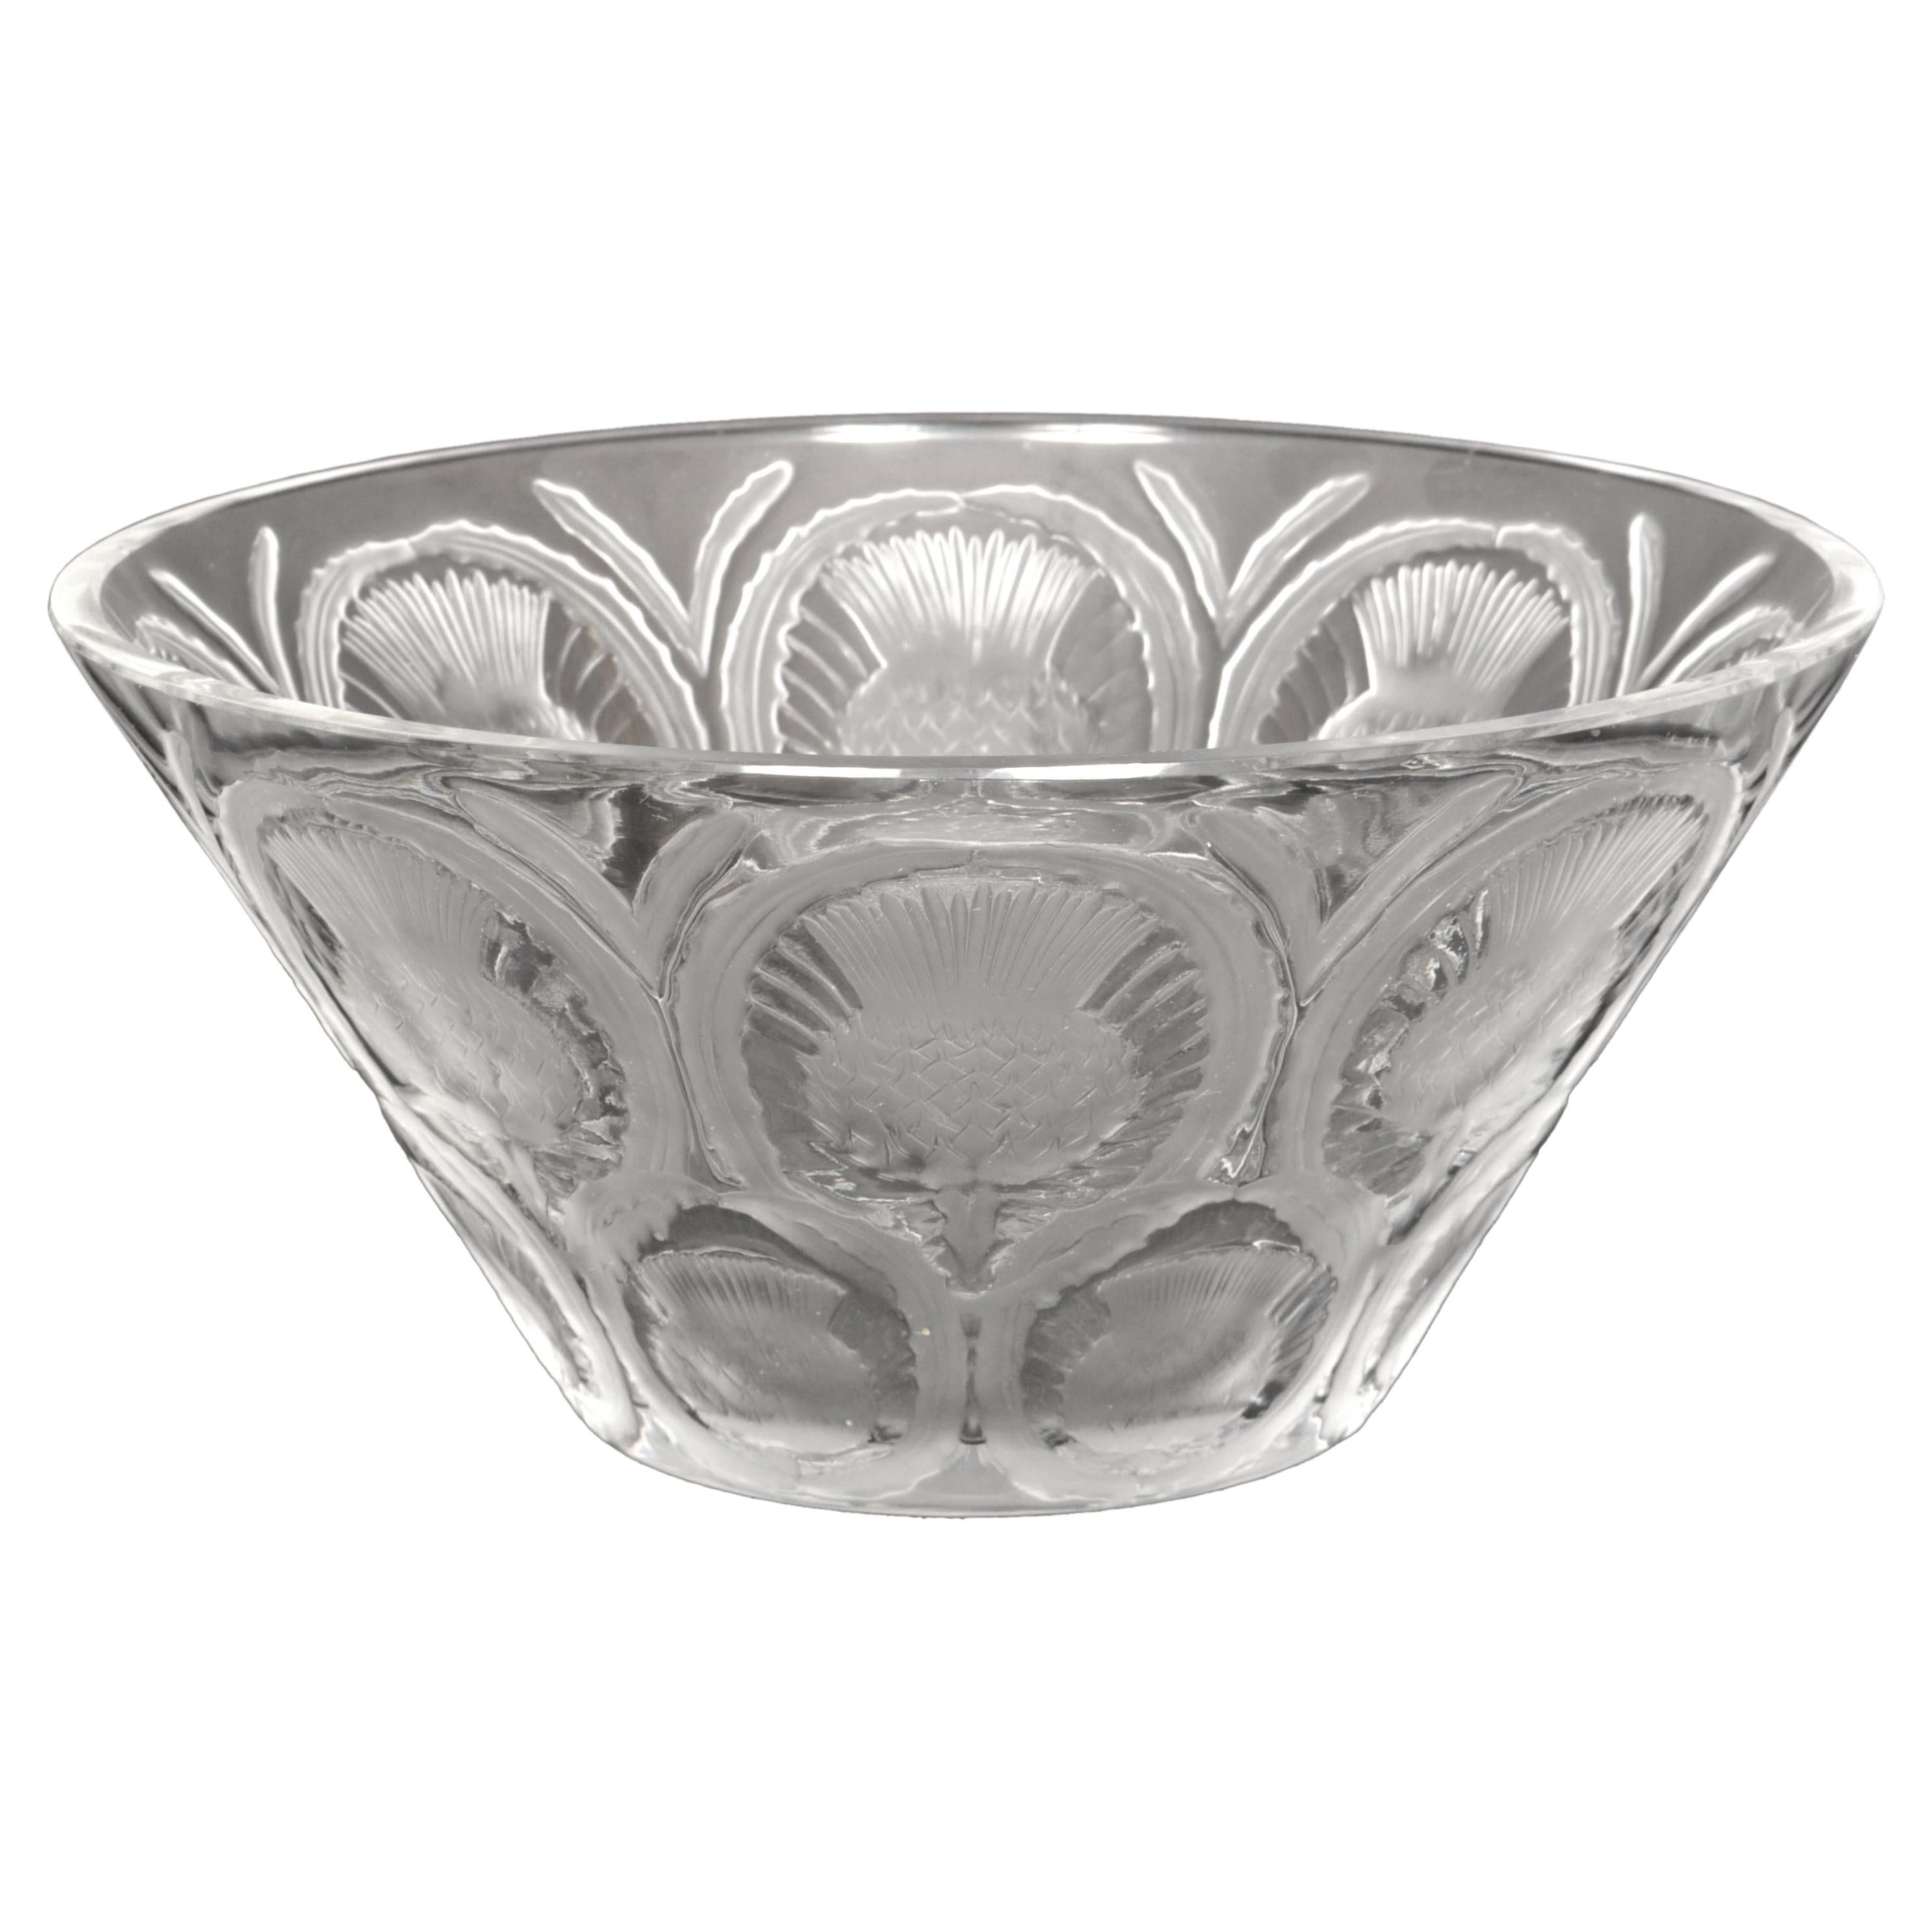 Antique French Lalique Crystal Glass Center Bowl "Chardons" Thistle Pattern 1930